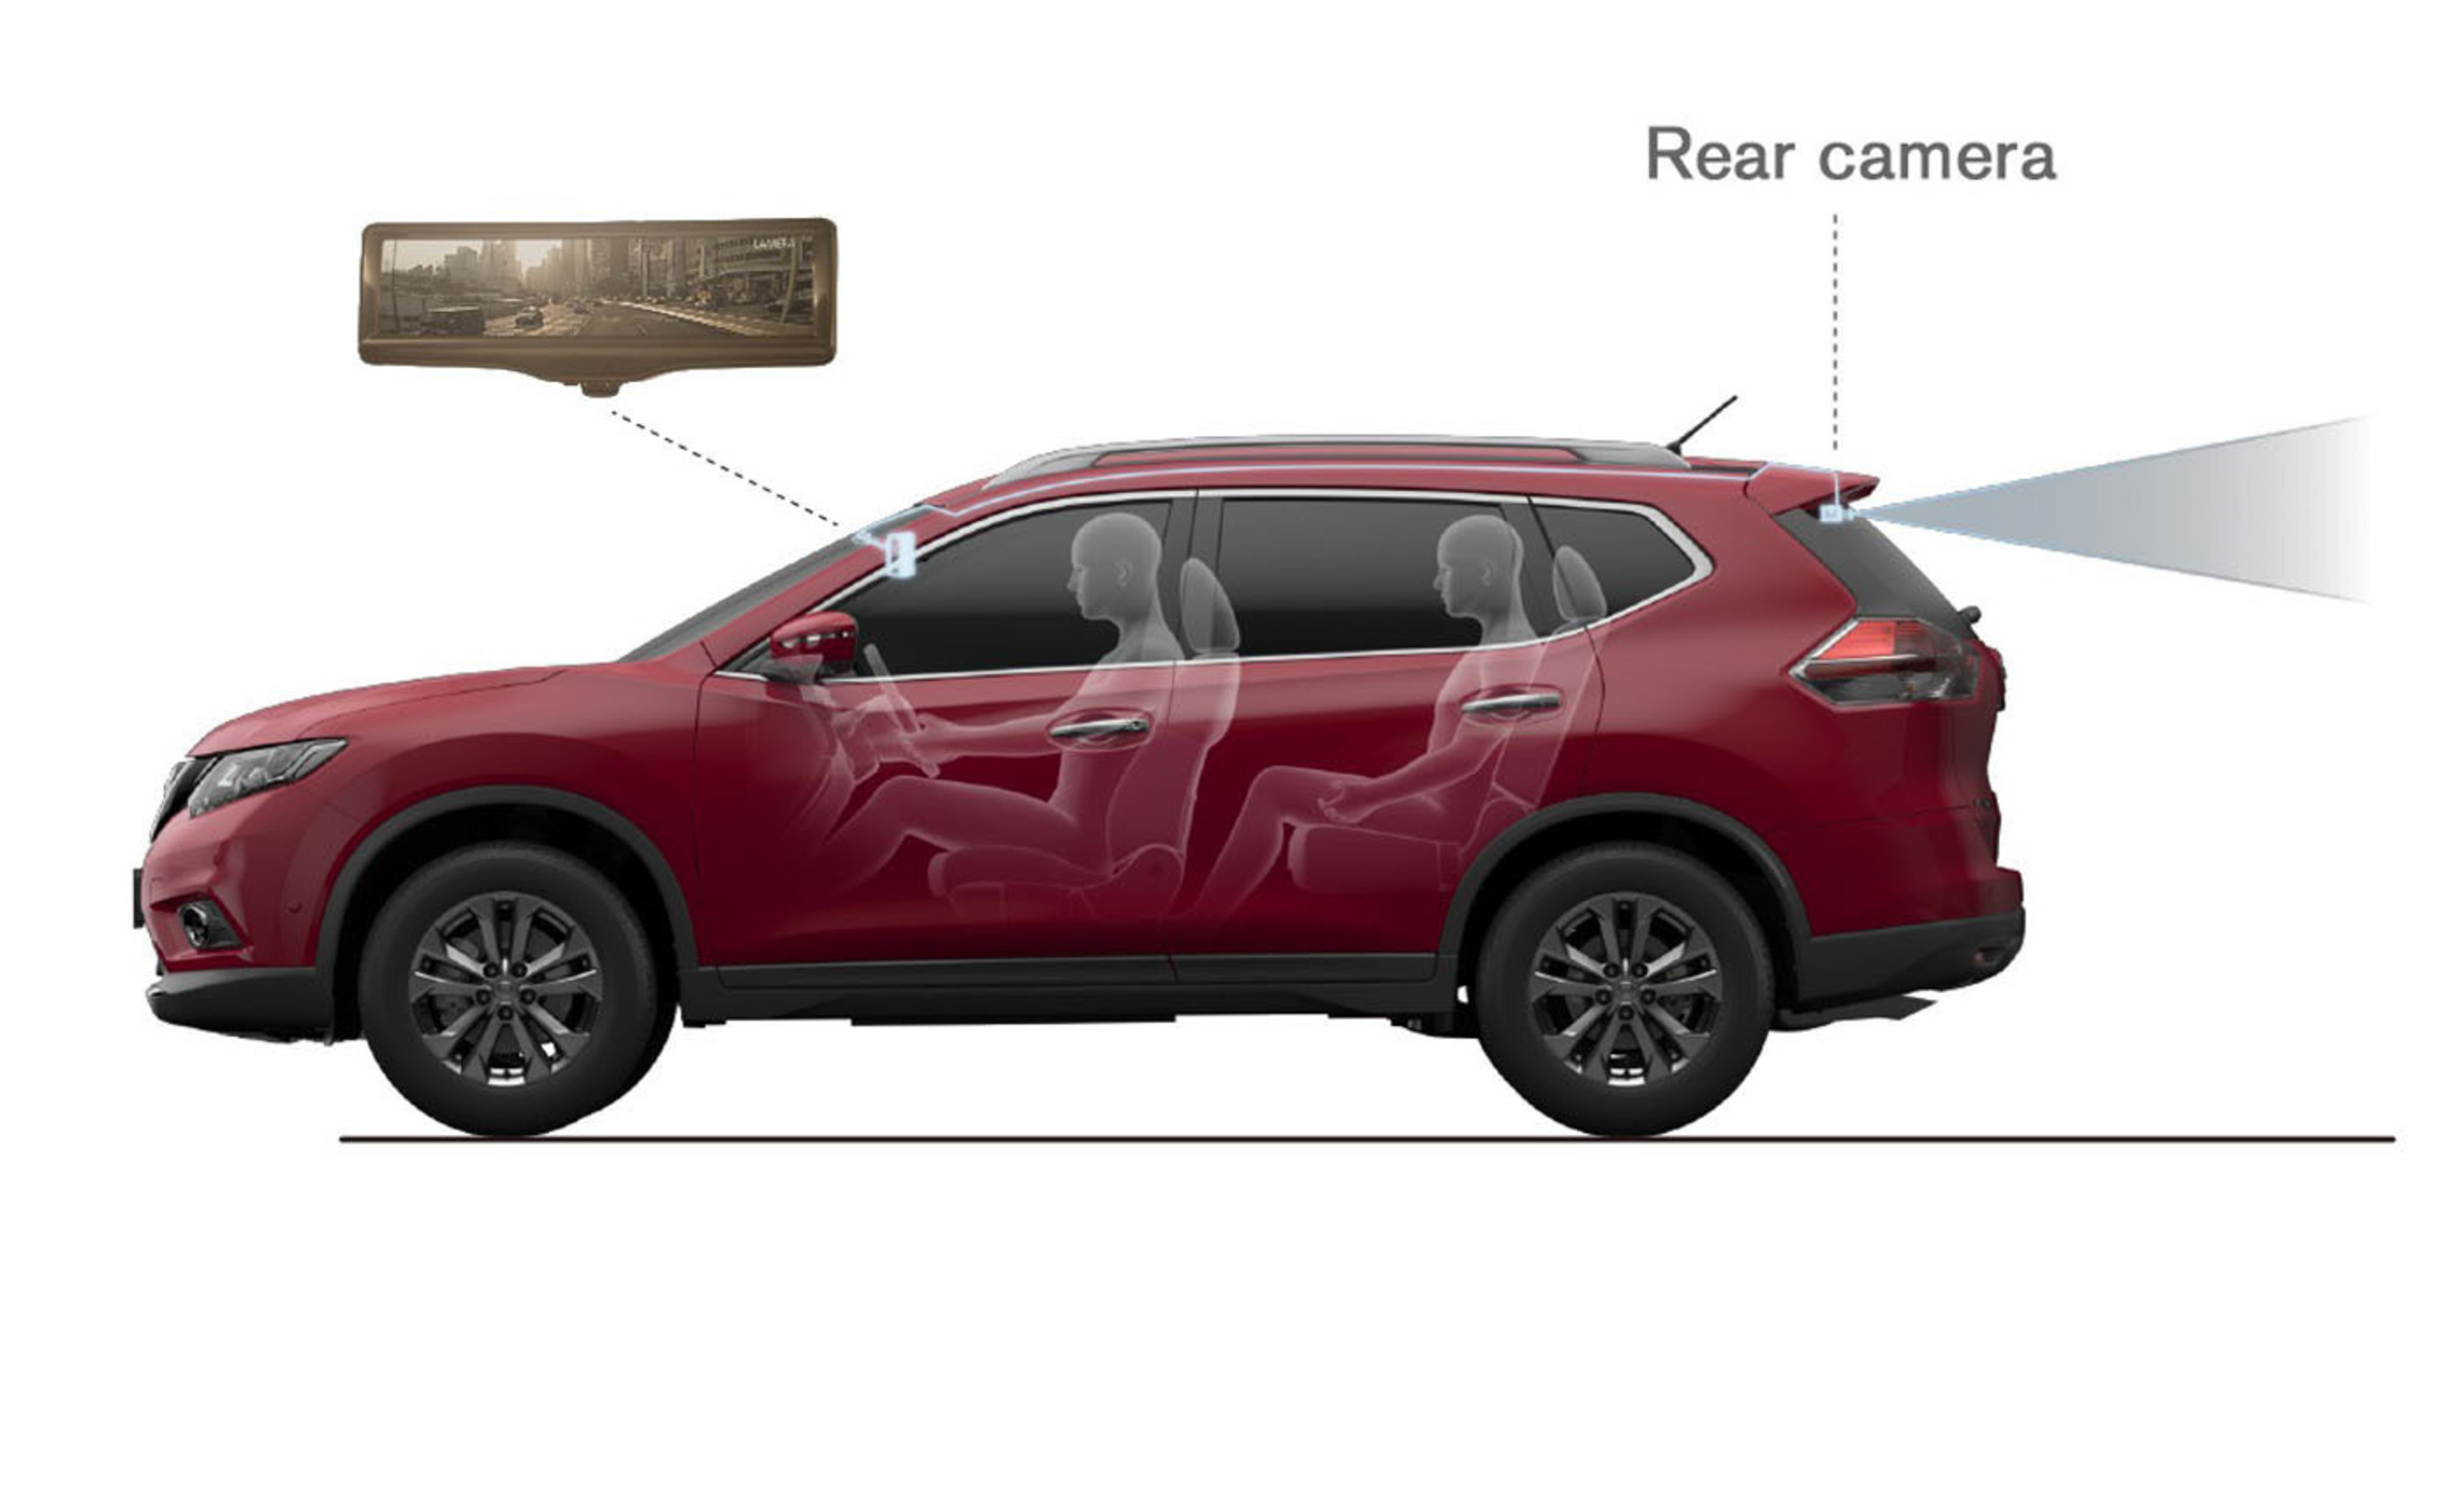 Nissan debuts "Smart Rearview Mirror" on Rogue at New York Auto show; Helps provide clear rearward visibility in various conditions. (PRNewsFoto/Nissan North America) (PRNewsFoto/NISSAN NORTH AMERICA)